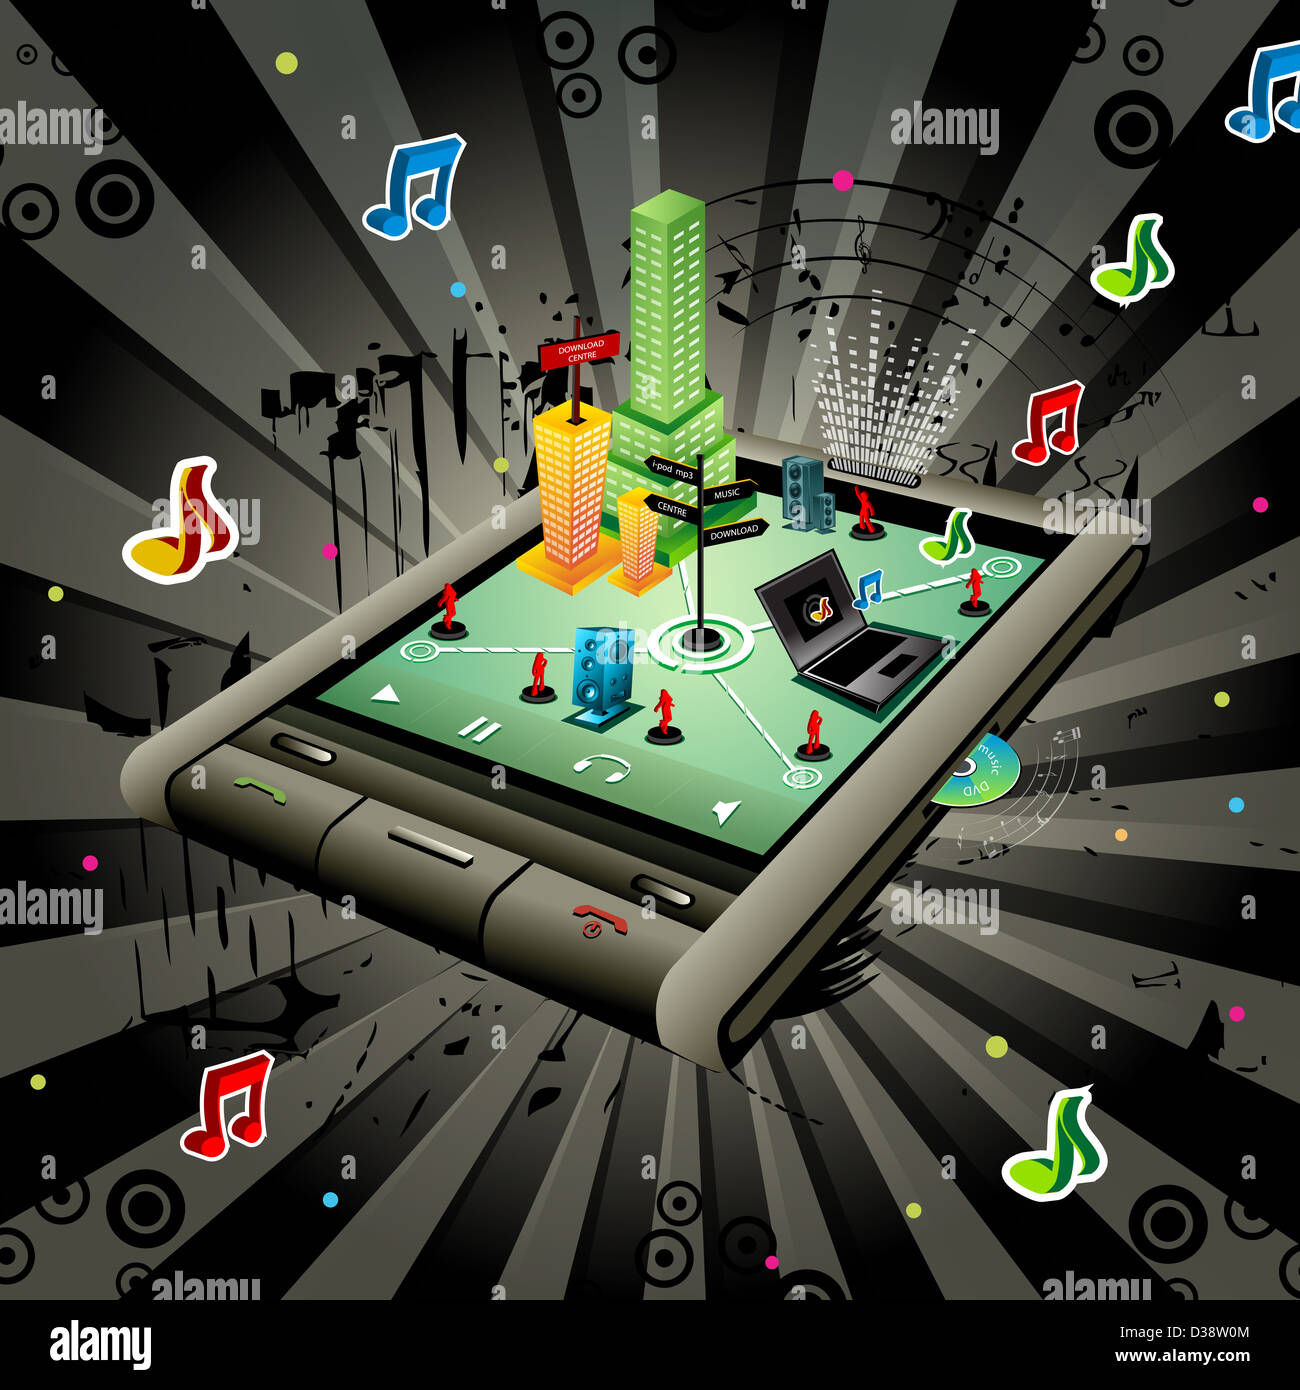 Illustrative representation showing the use of a mobile phone as music player Stock Photo